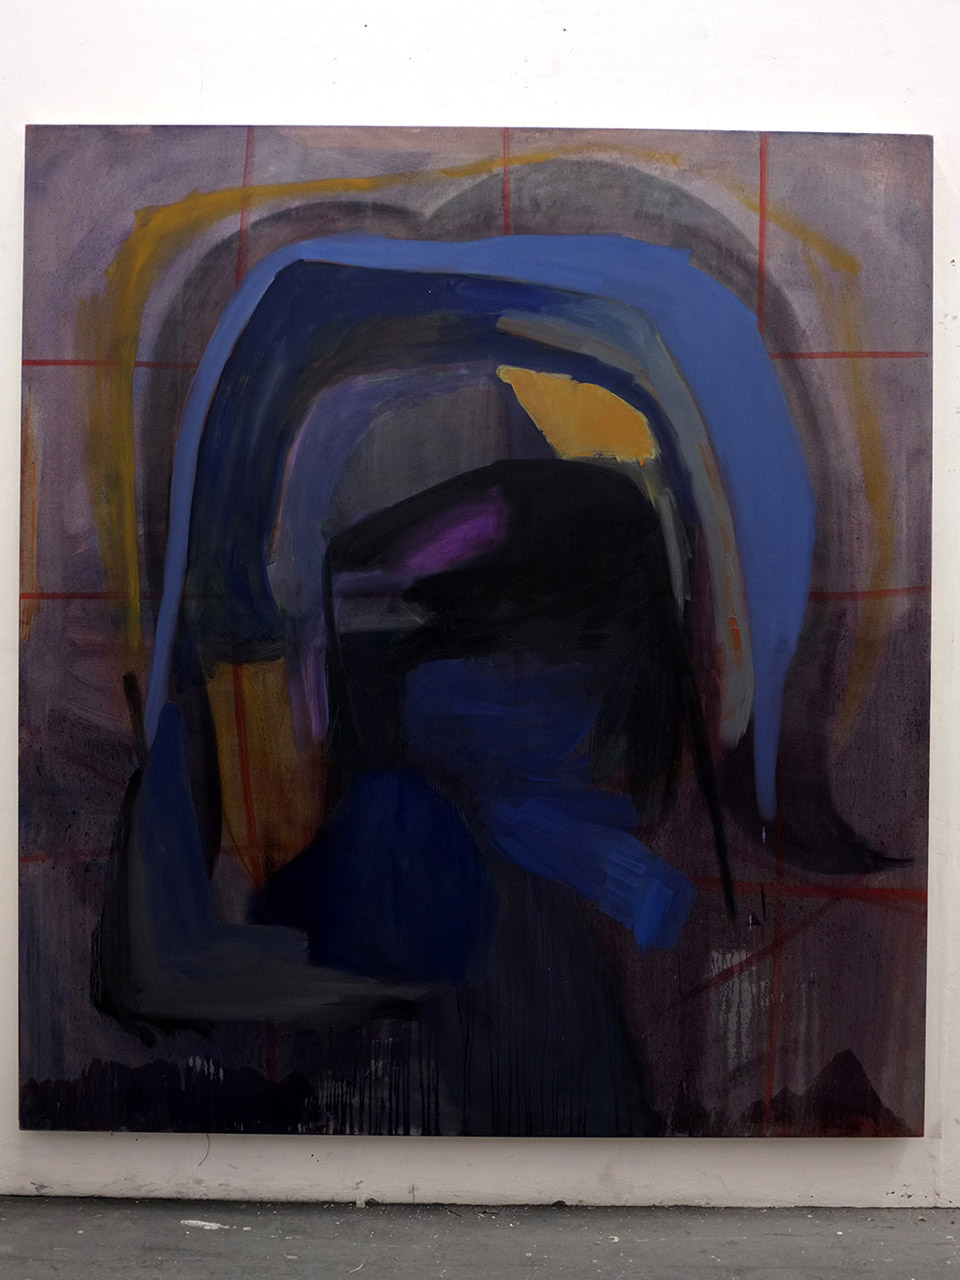 Untitled, 2013, oil on canvas, 200 x 180 cm